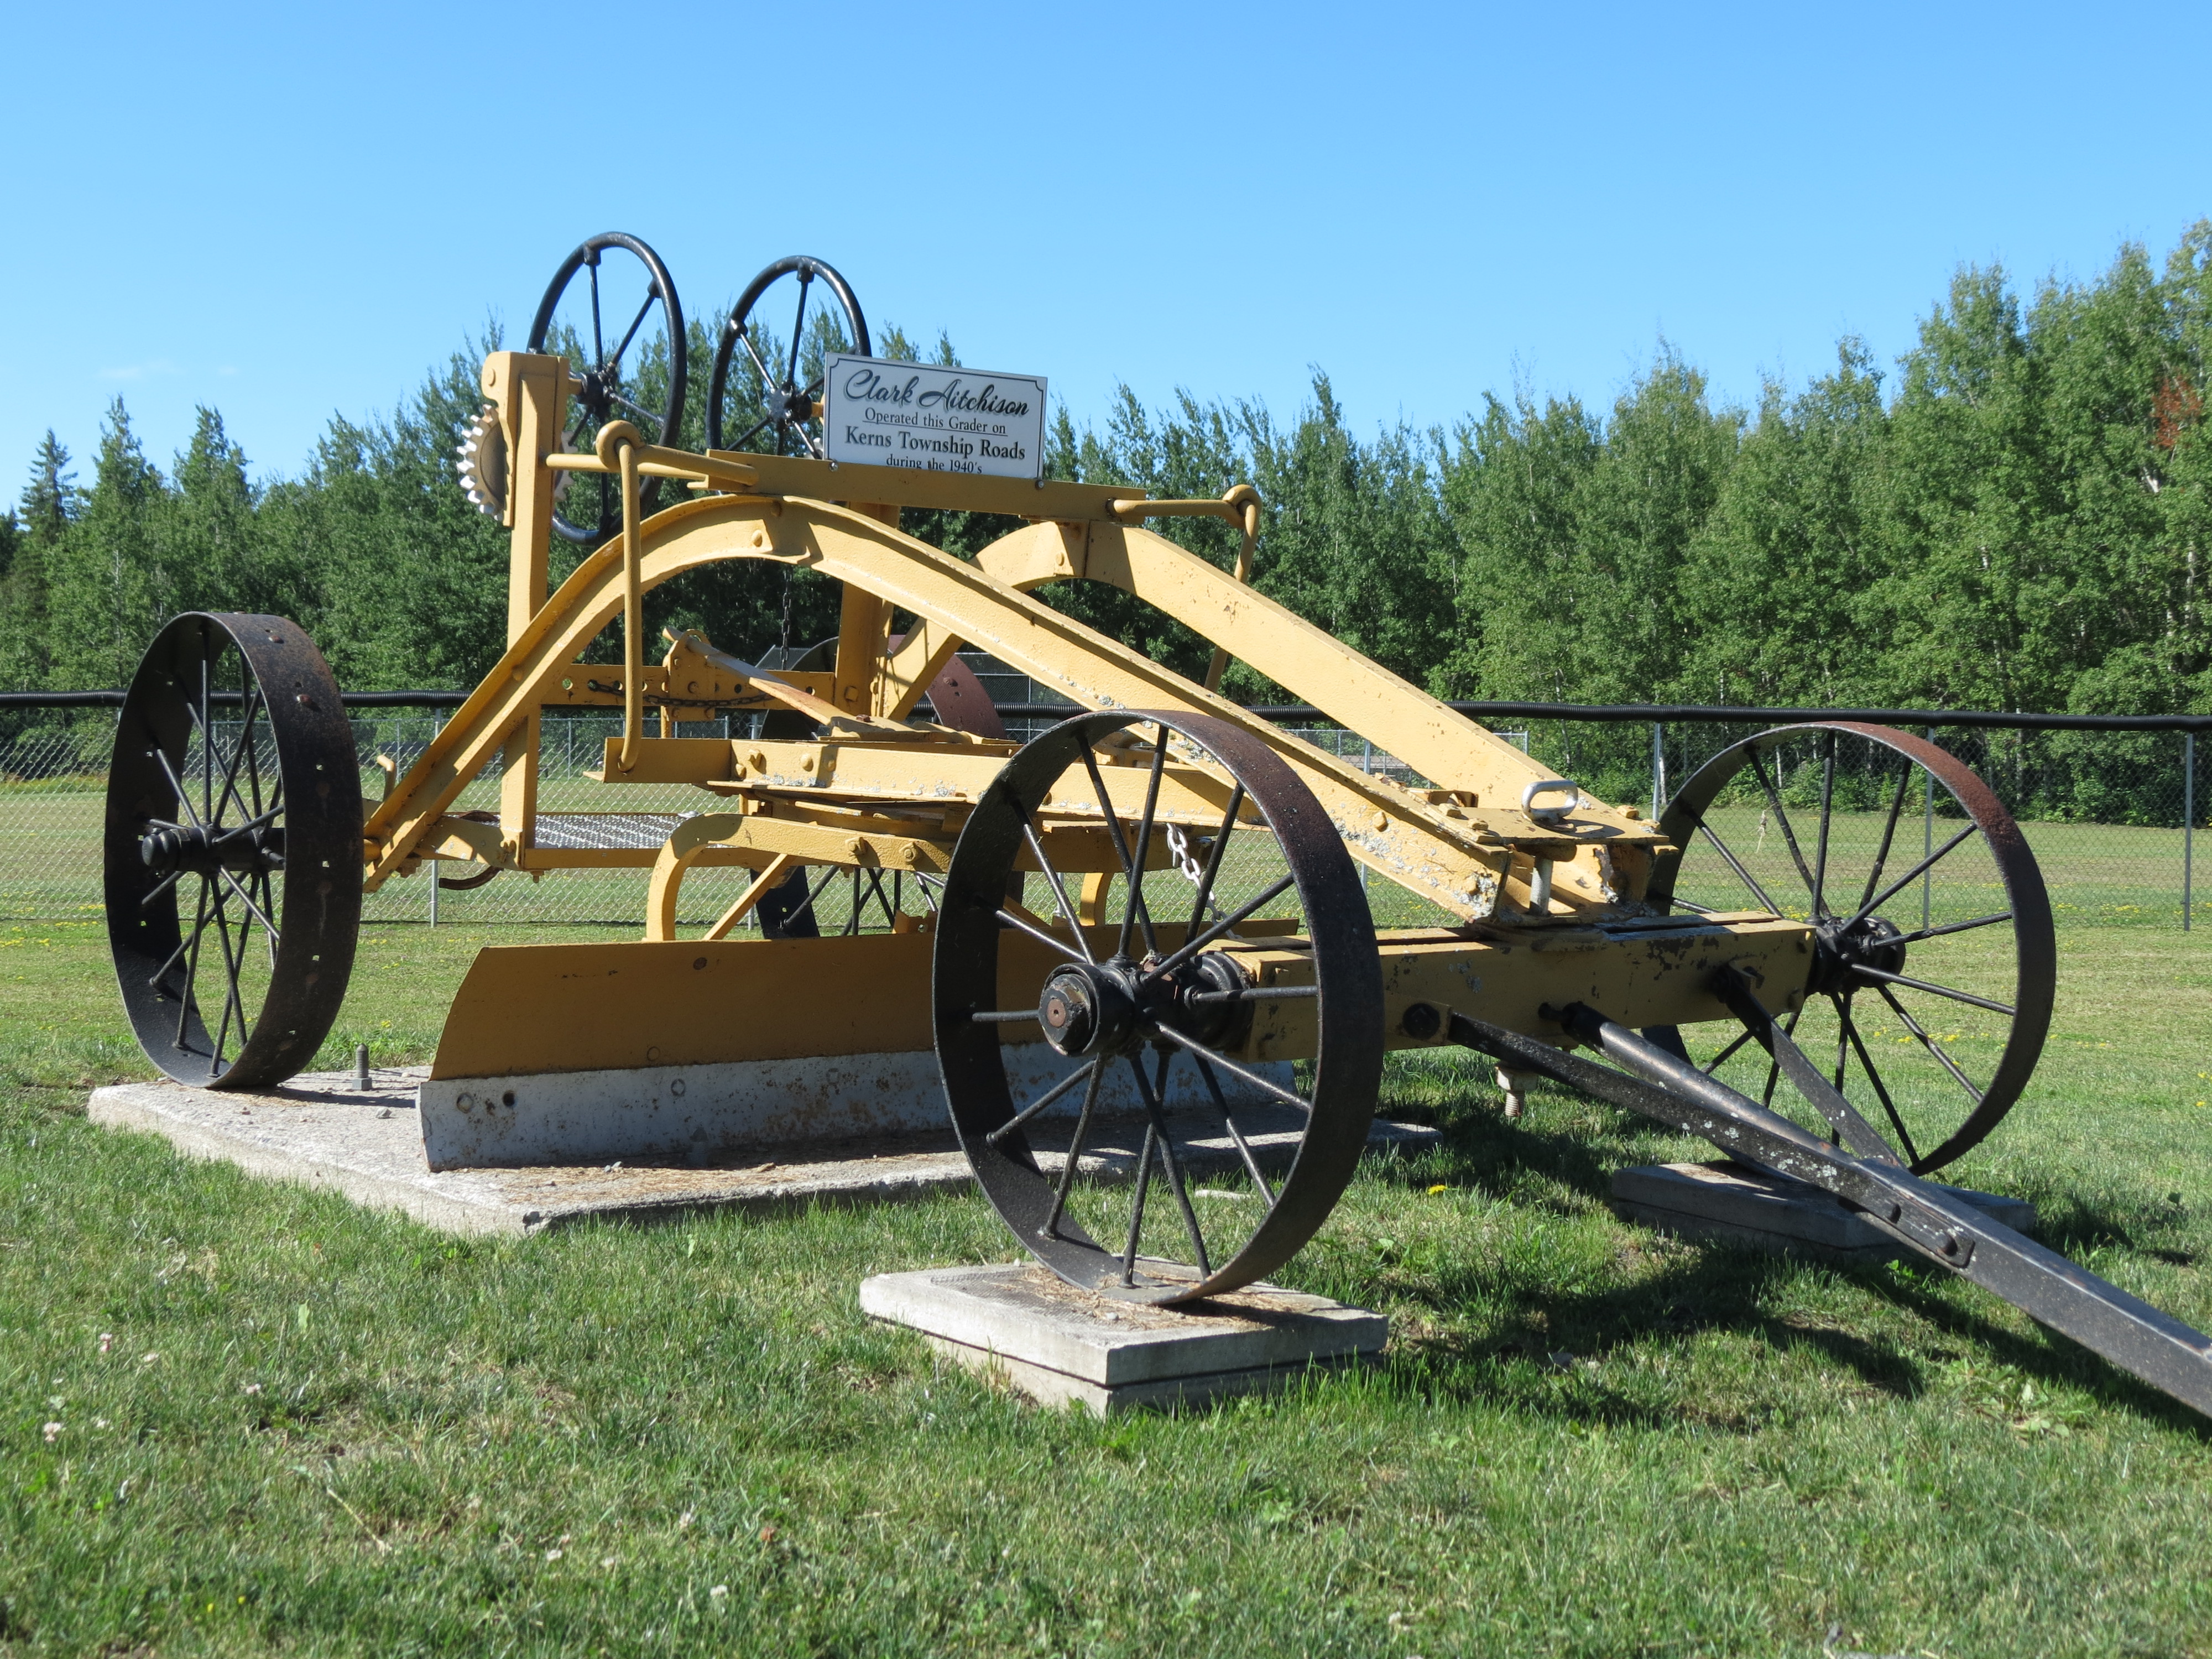 An antique yellow metal road plough on 4 iron wheels, designed to be pulled behind horses. It is displayed on the Milberta Church grounds, surrounded by green grass and lush green trees, under a bright blue sky.